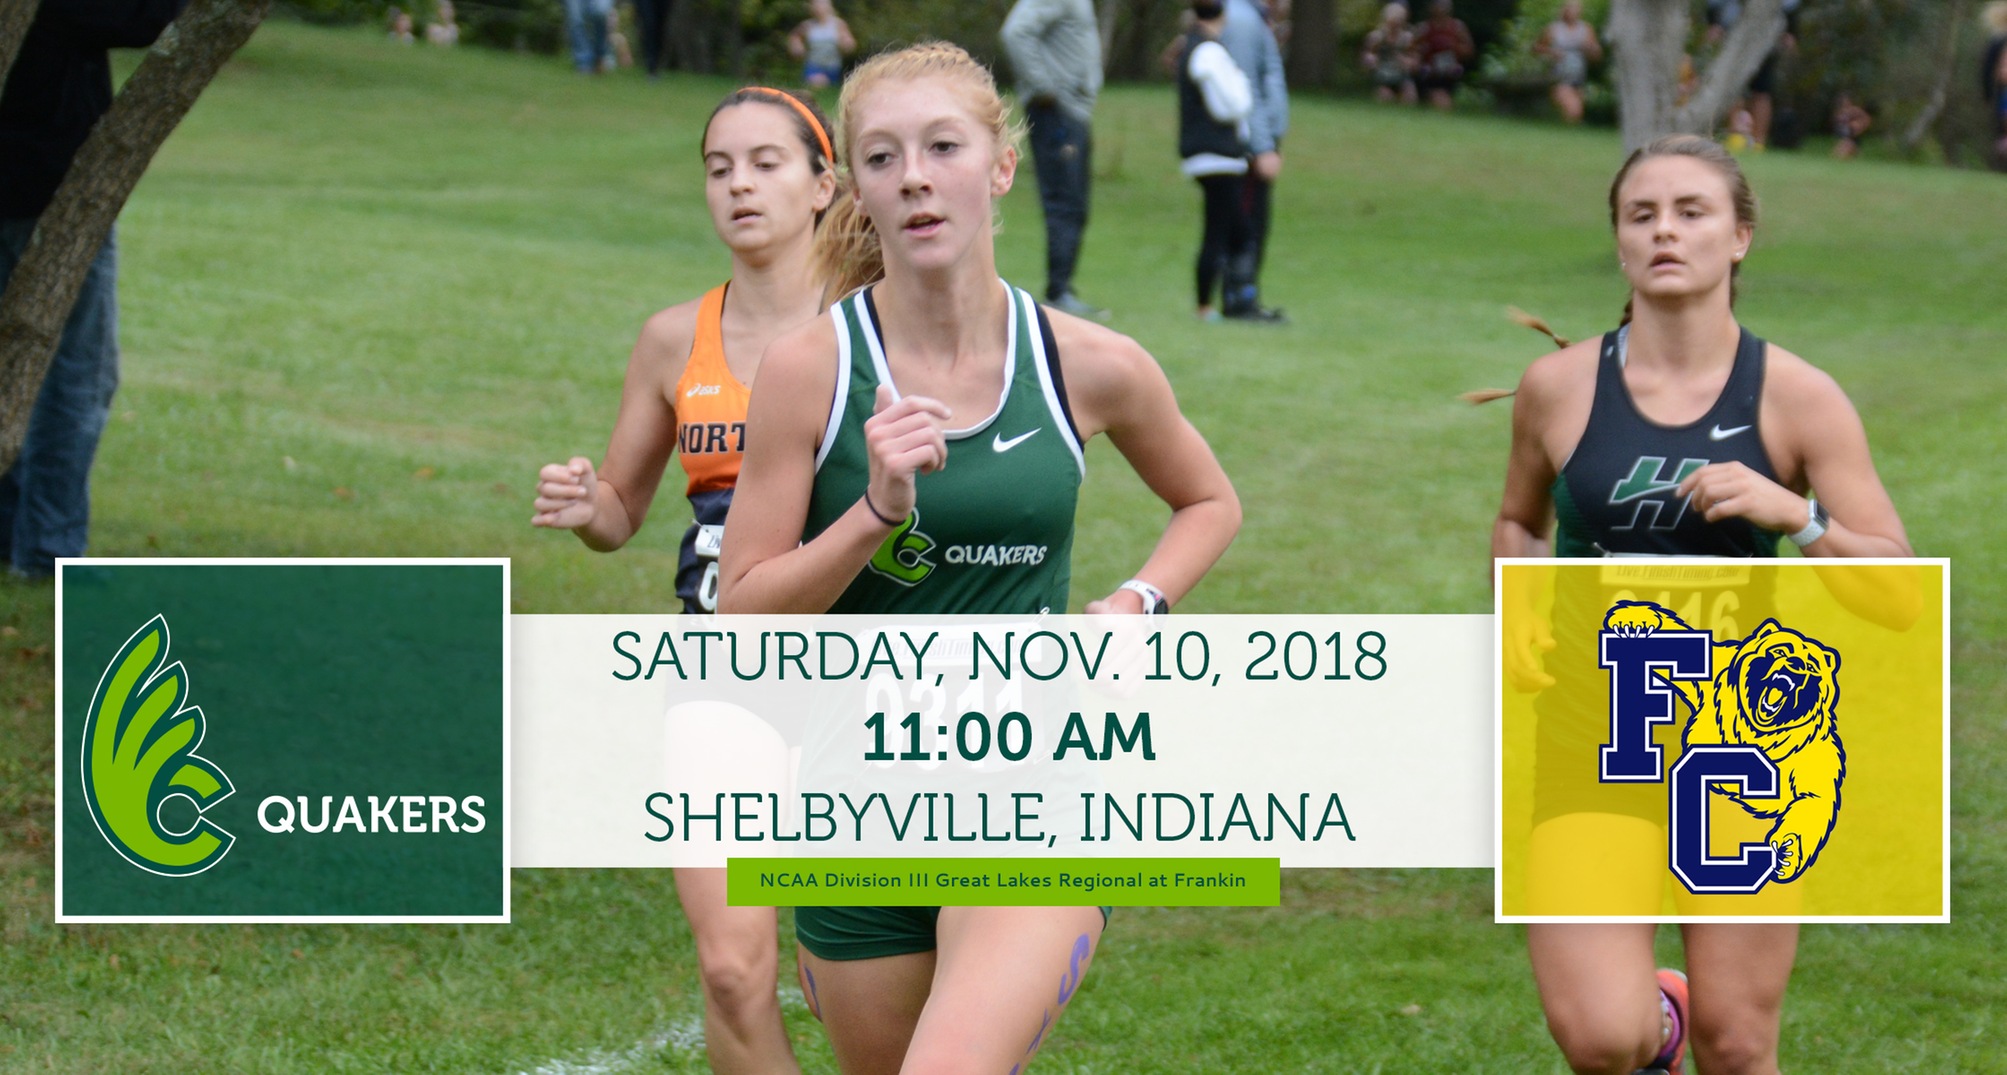 Women's Cross Country Heads to NCAA Great Lakes Regional at Franklin Saturday